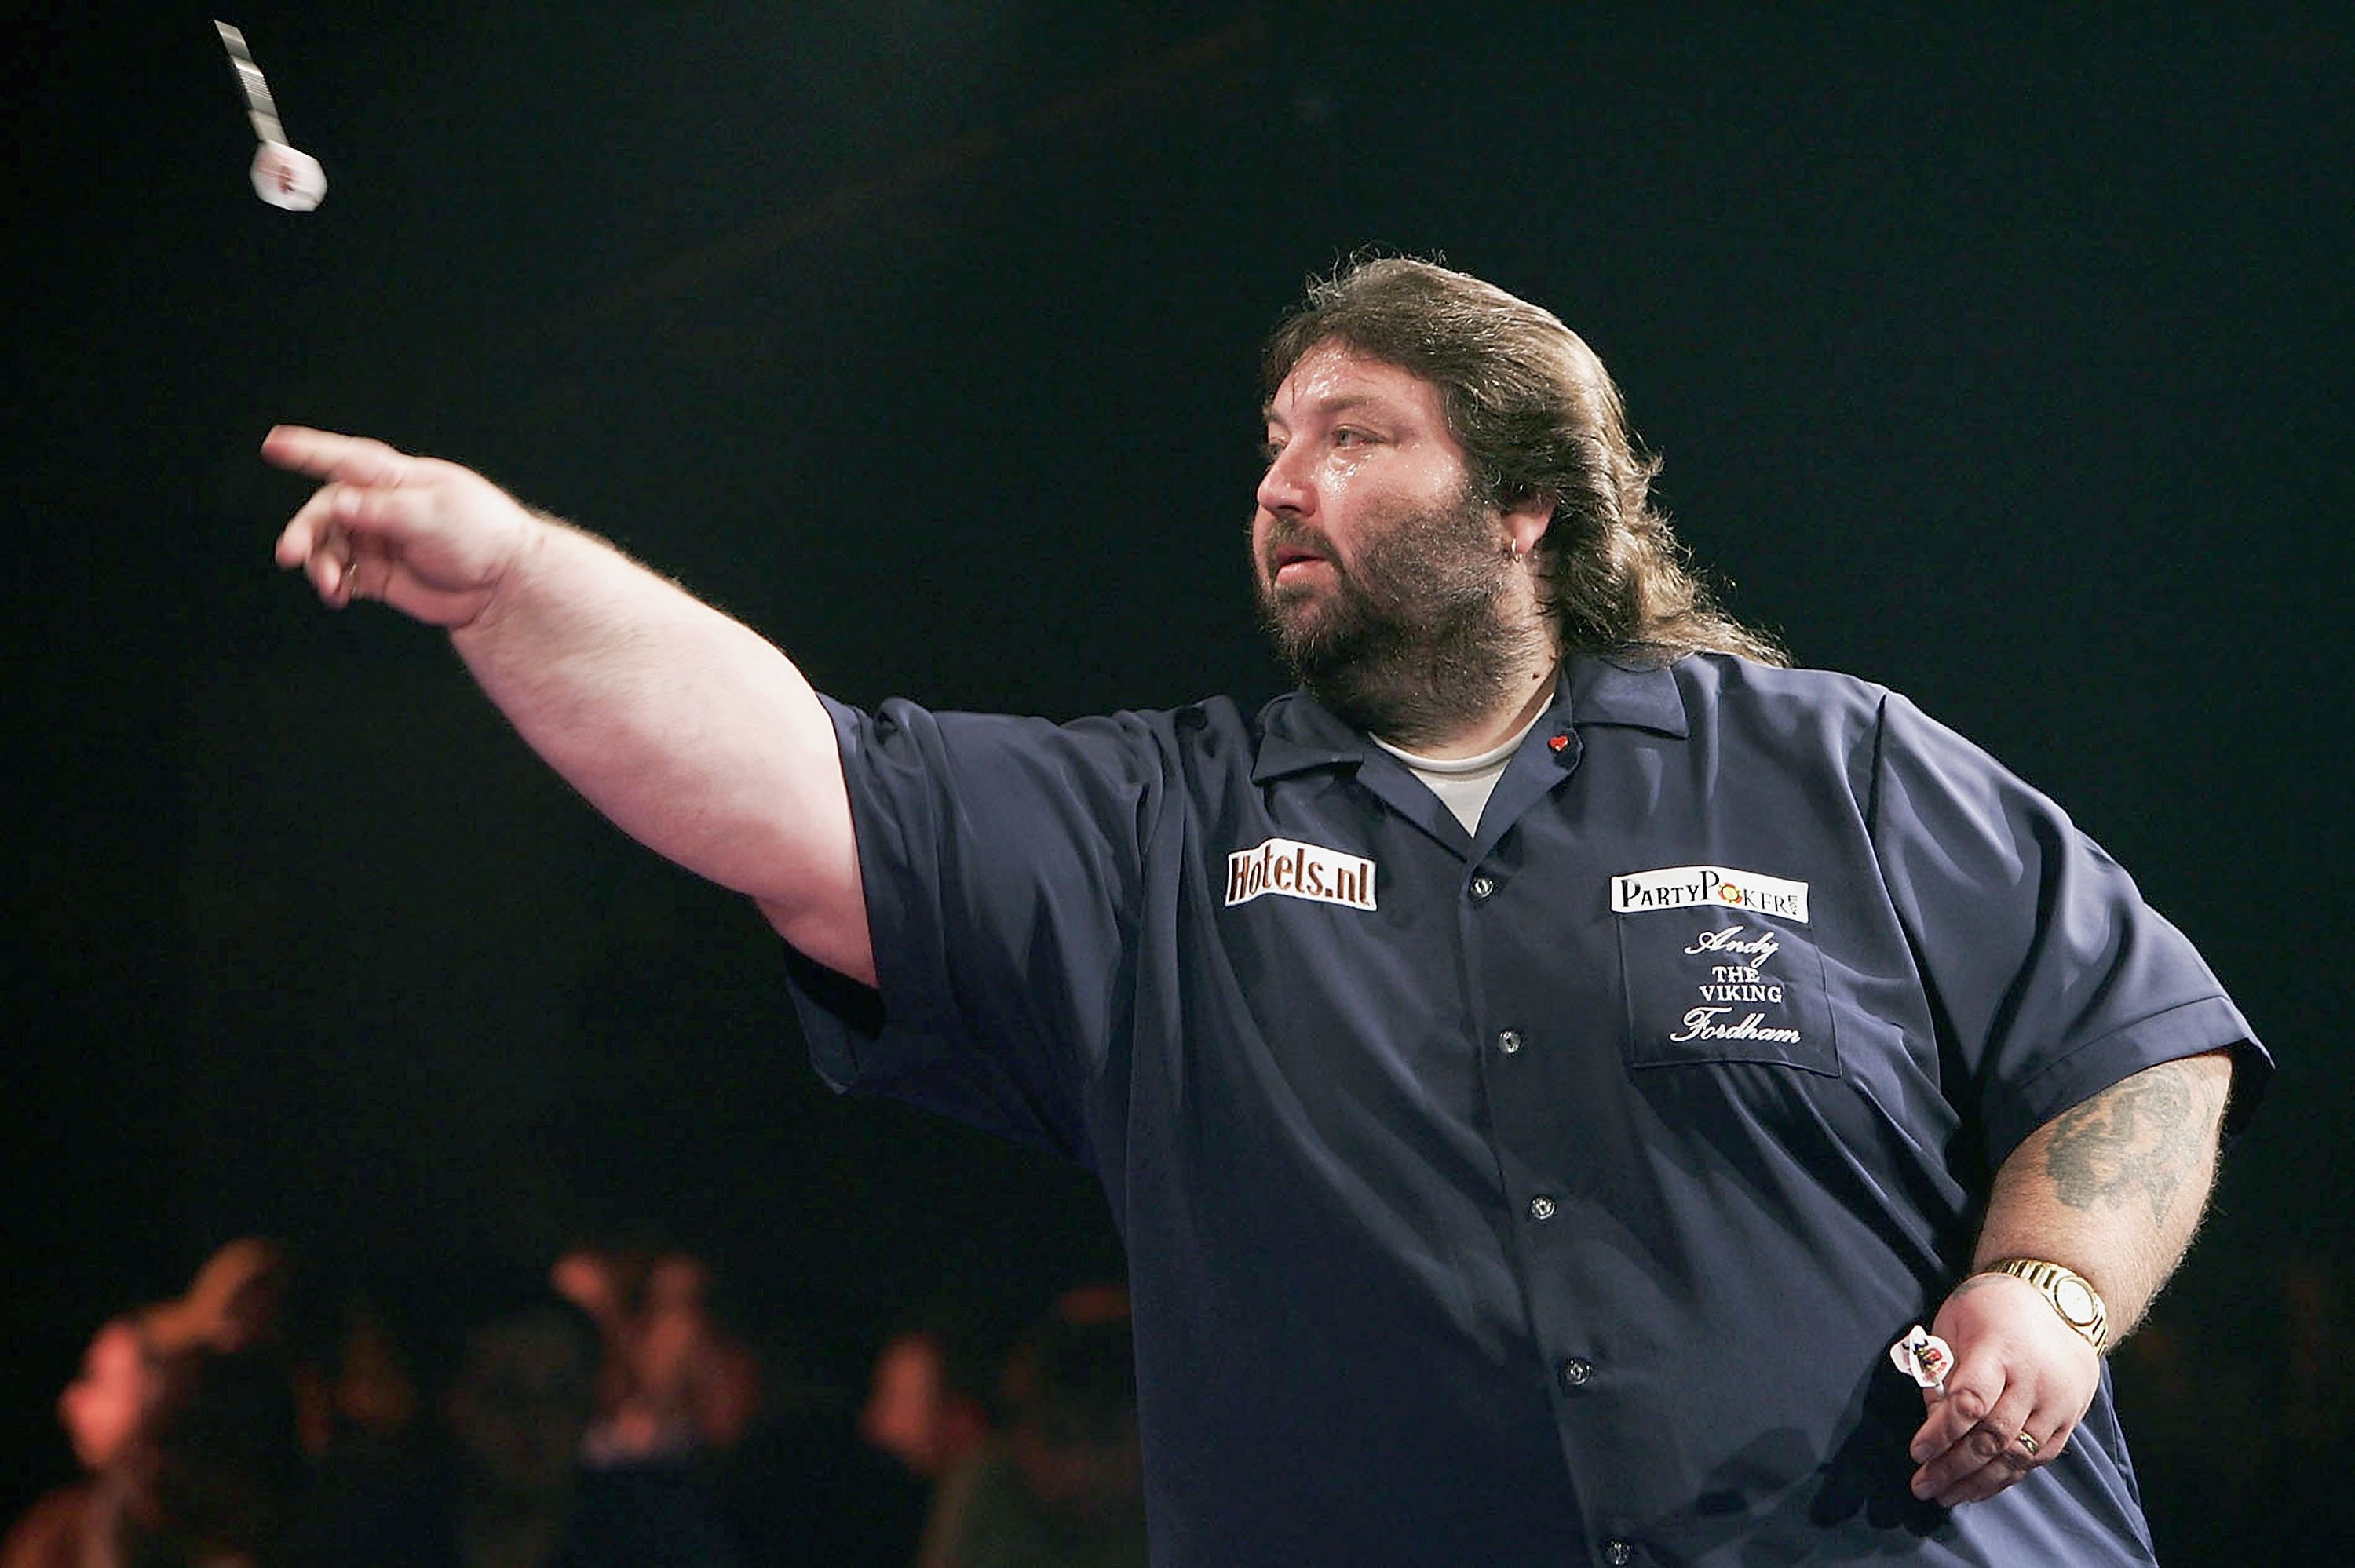 Andy Fordham in action during the Showdown match between Phil Taylor and Andy Fordham at The Circus Tavern on November 21, 2004 in Purfleet, England. | Source: Getty Images